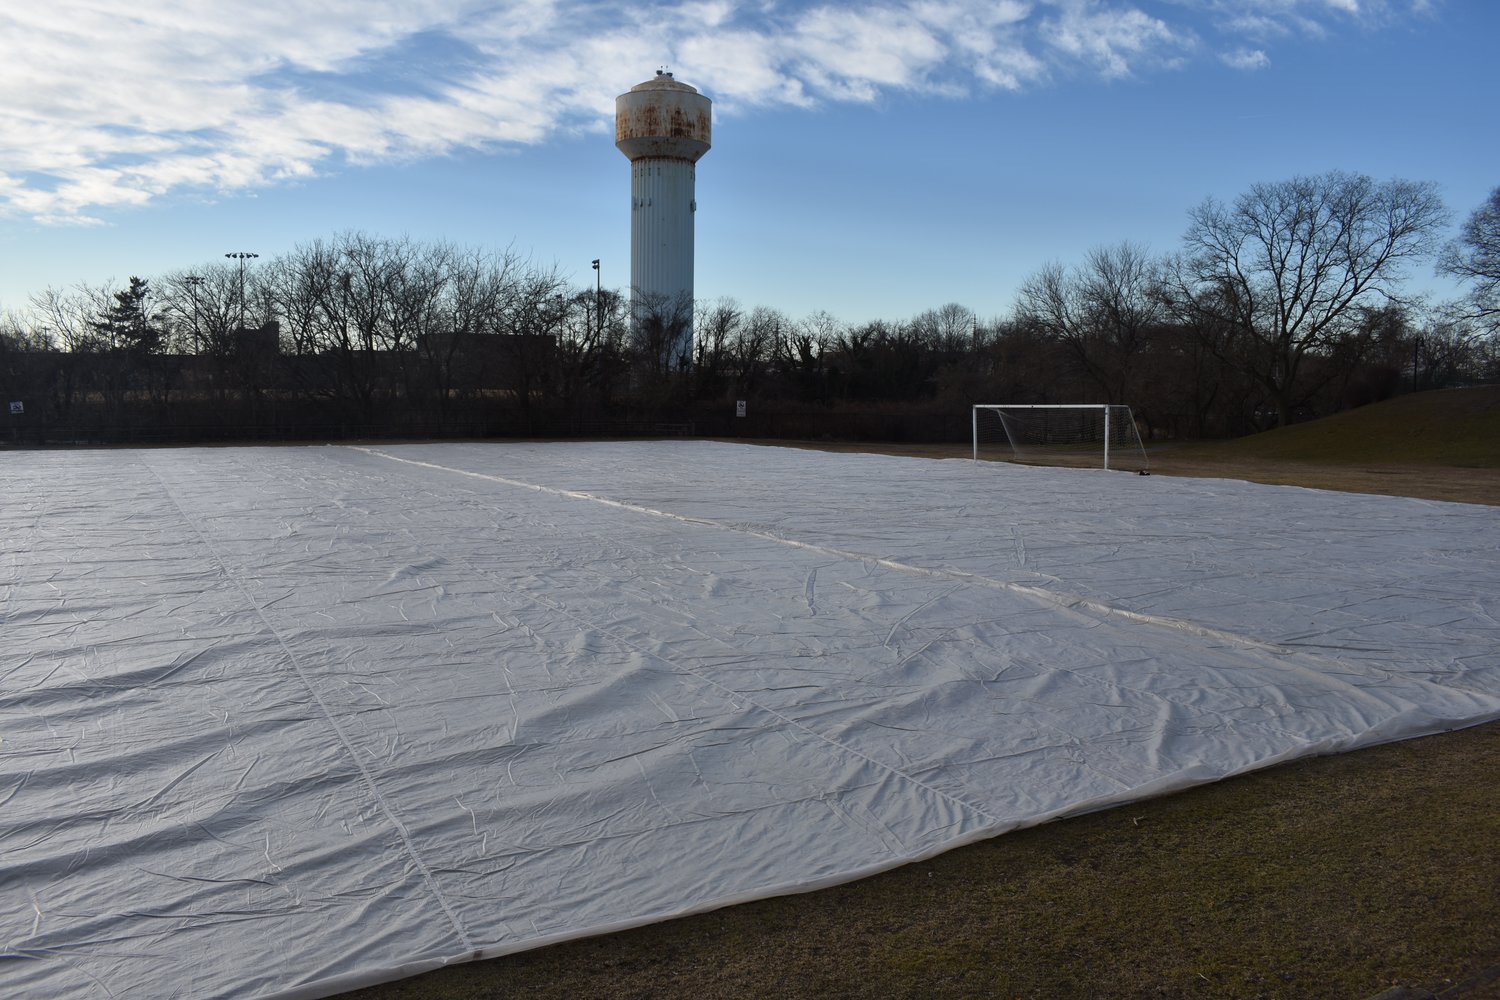 The field, which was covered with a tarp last week, will be able to be used year-round, according to Mayor Francis X. Murray, after artificial turf is installed later this year.